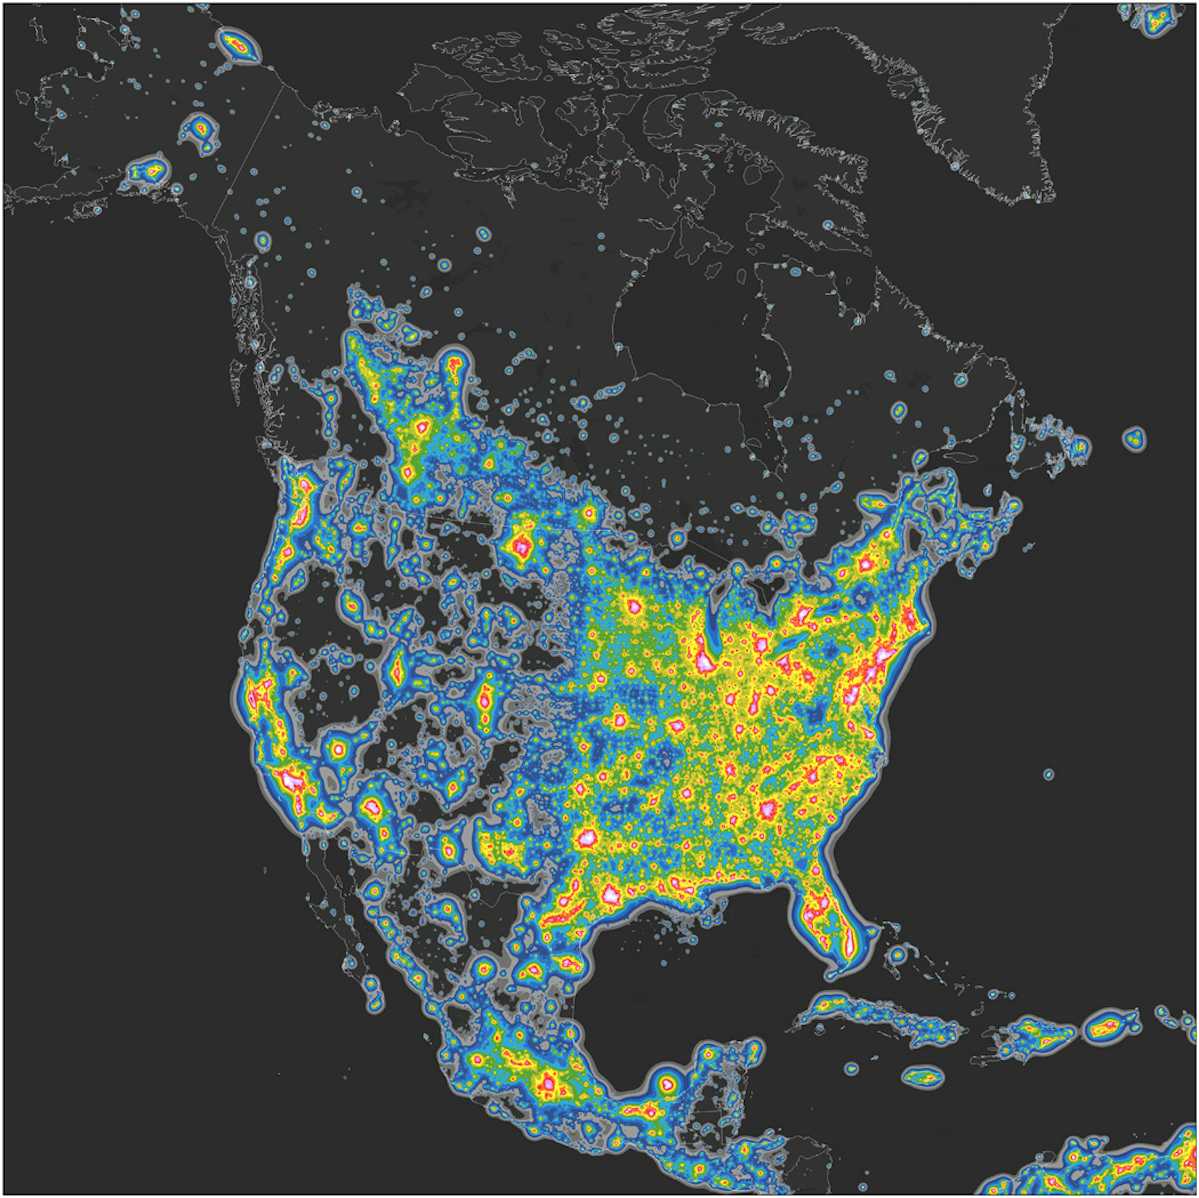 New atlas shows extent of light pollution what does it mean for our